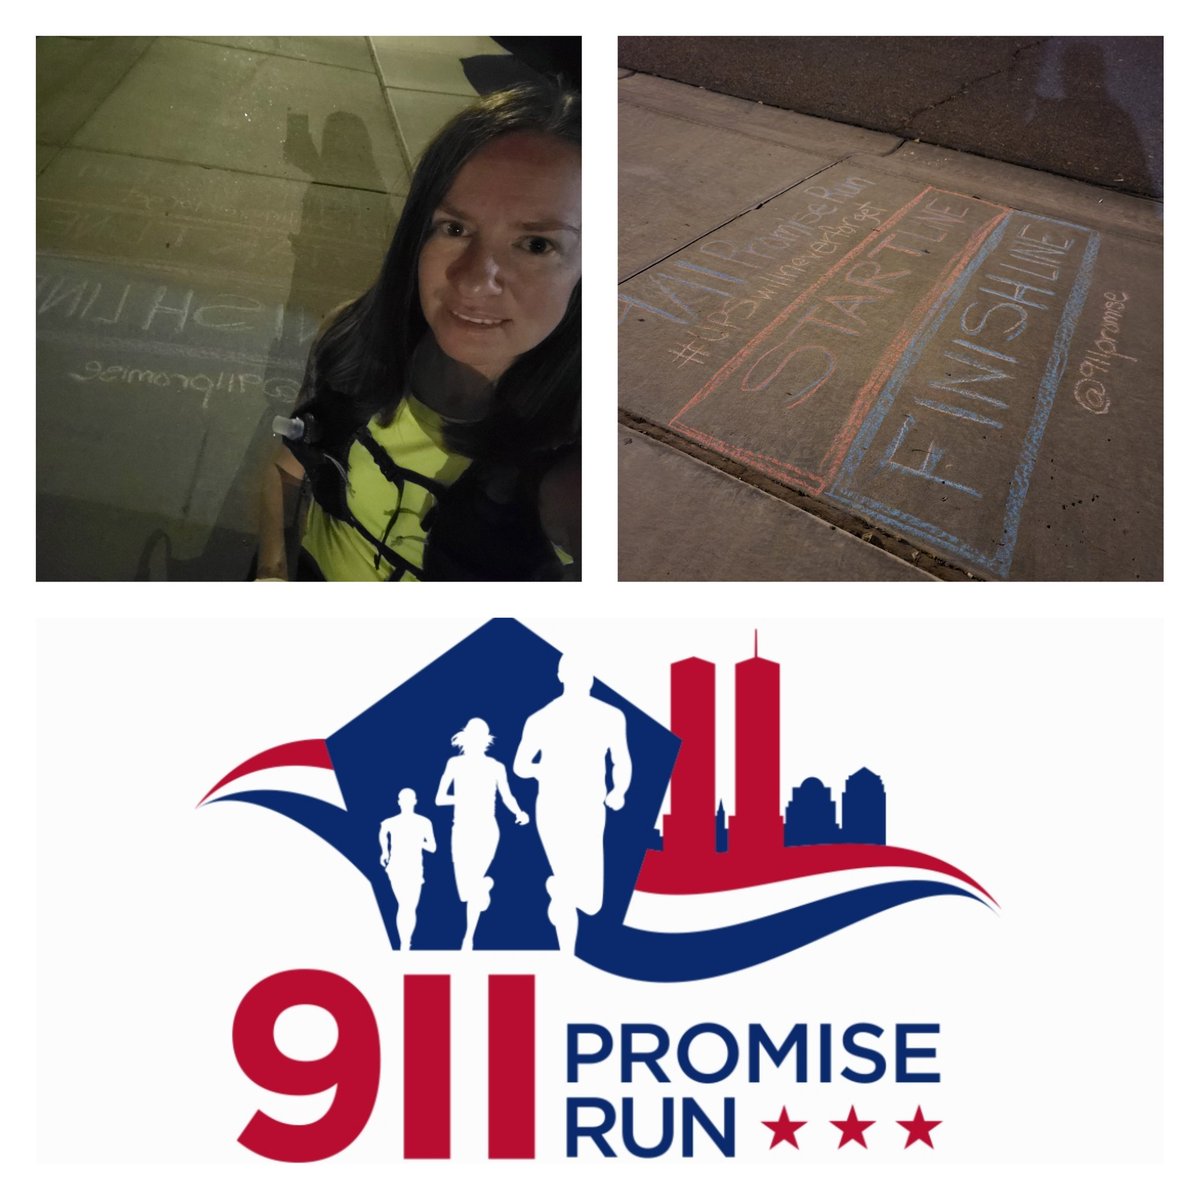 Feeling extremely honored to have participated in the 9/11 Promise Run with Team UPS. The dark quiet miles before sunrise gave me time to remember and reflect. Total Time 1:36:07 9.11 mile run #UPSwillneverforget @911PromiseRun @DesertMTUPSers